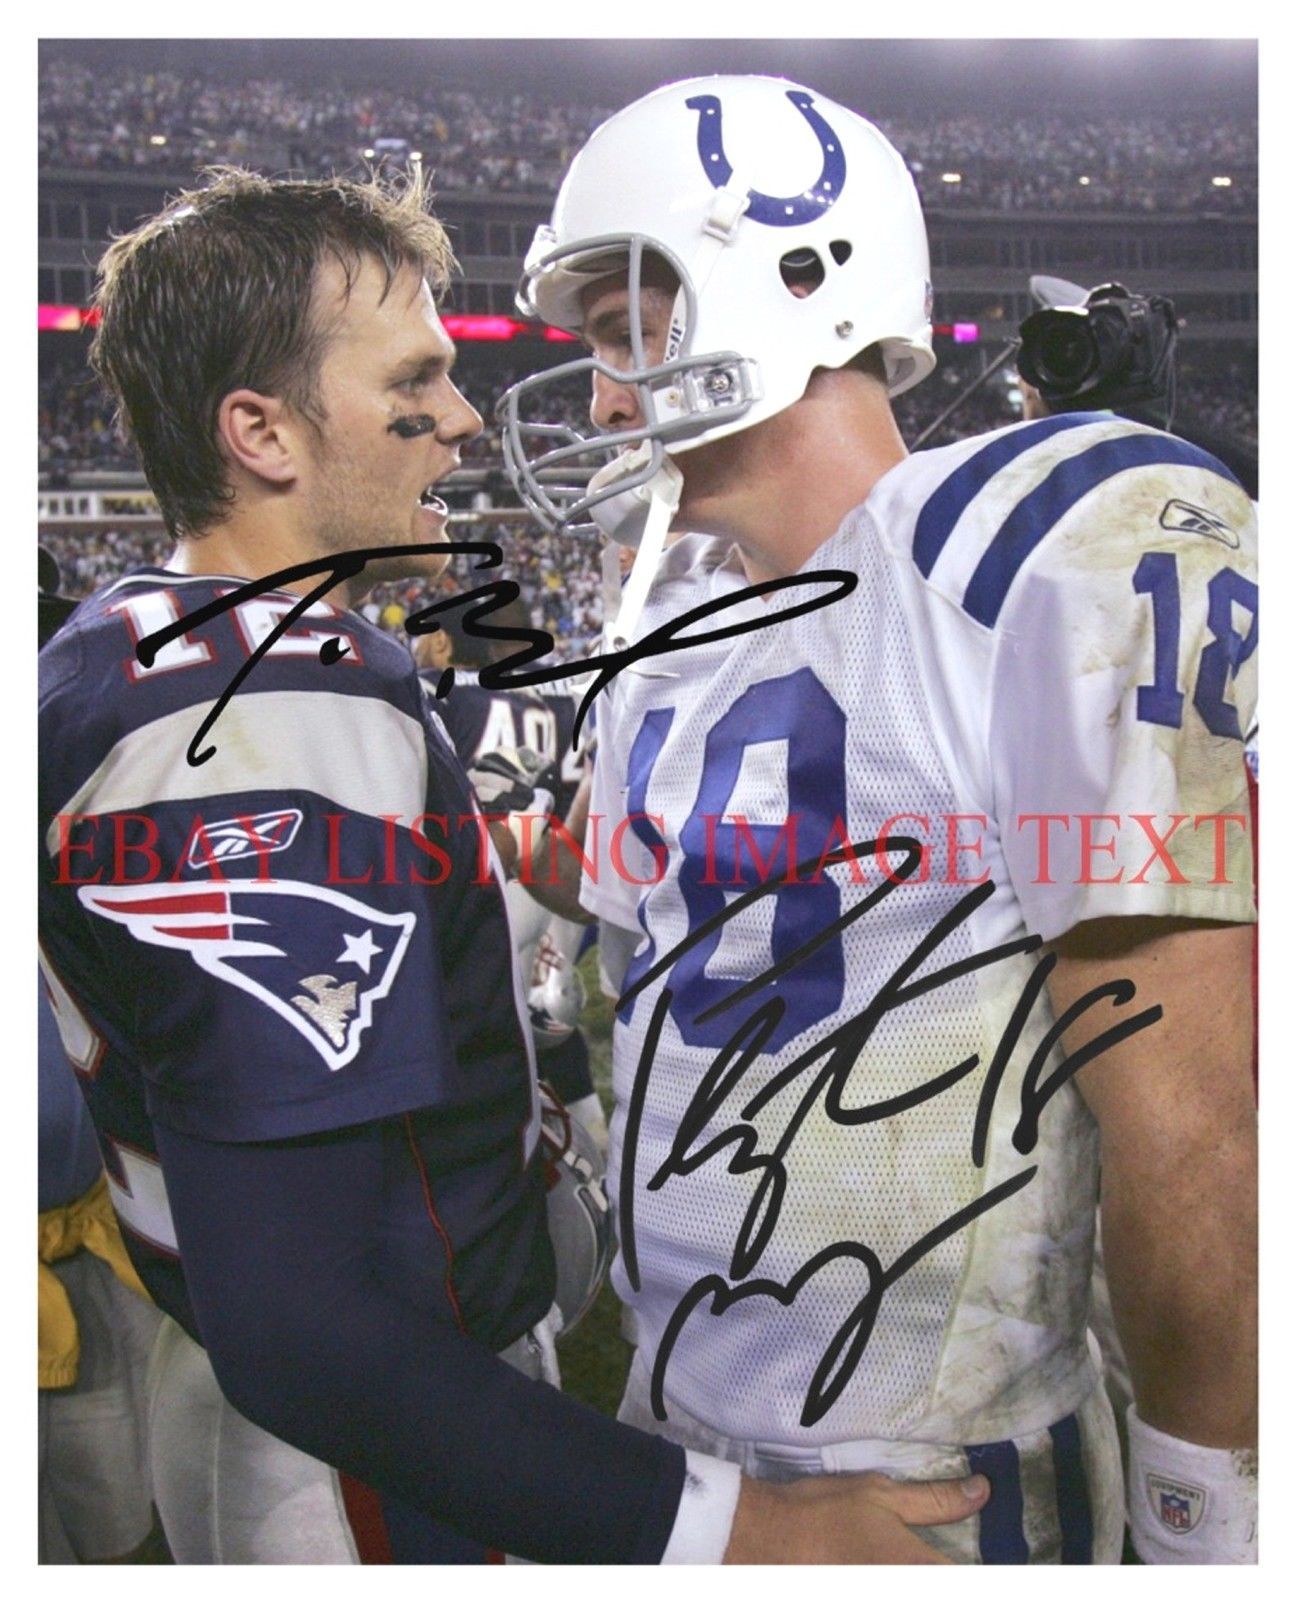 PEYTON MANNING AND TOM BRADY SIGNED AUTO AUTOGRAPH 8x10 RP PHOTO - $19.99